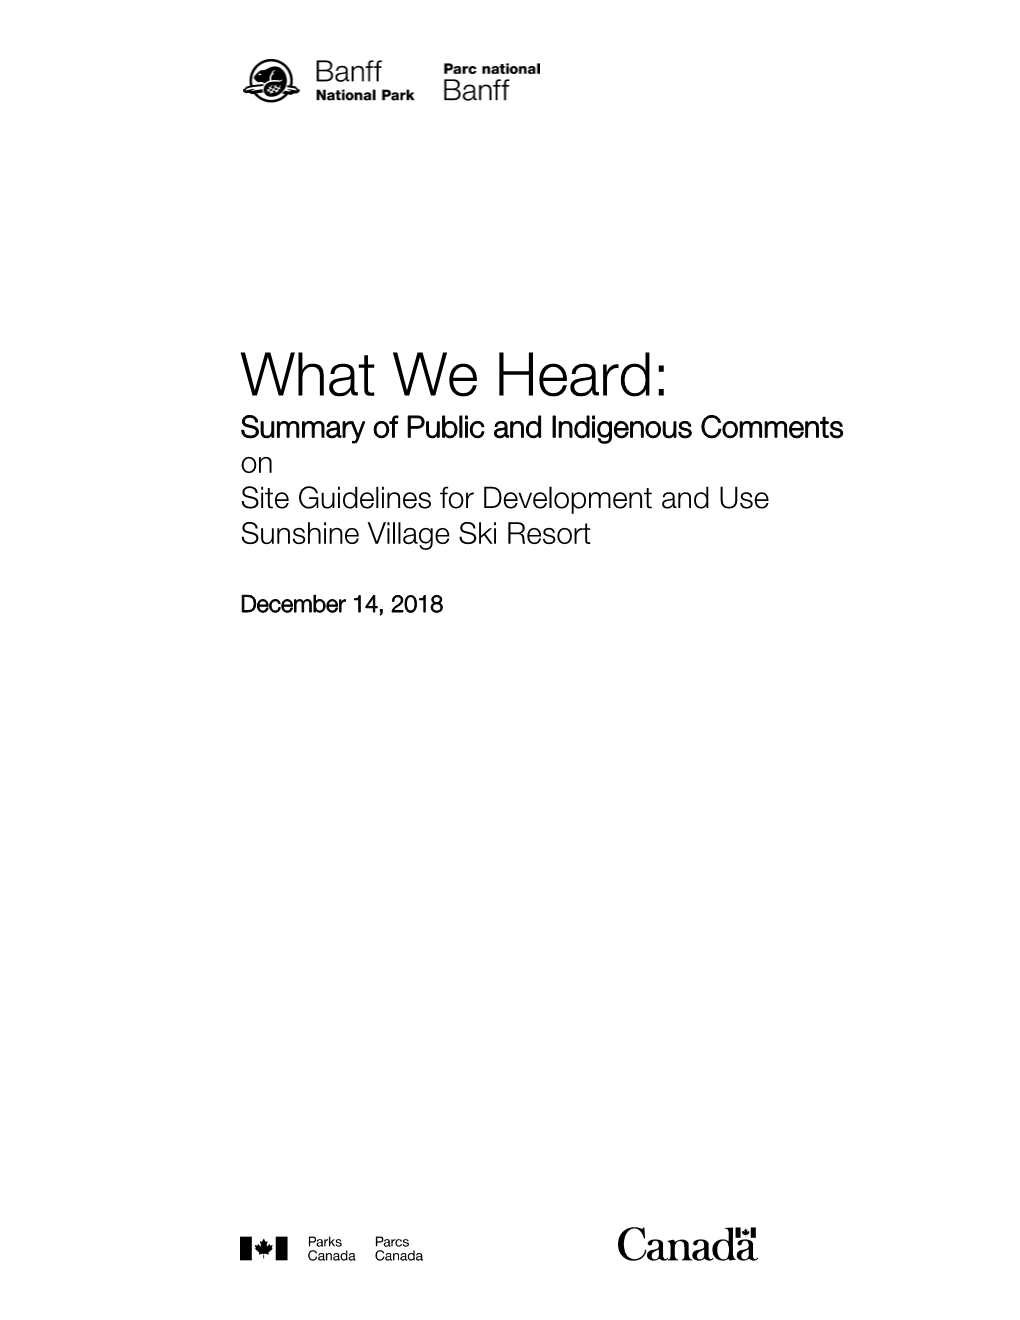 What We Heard: Summary of Public and Indigenous Comments on Site Guidelines for Development and Use Sunshine Village Ski Resort